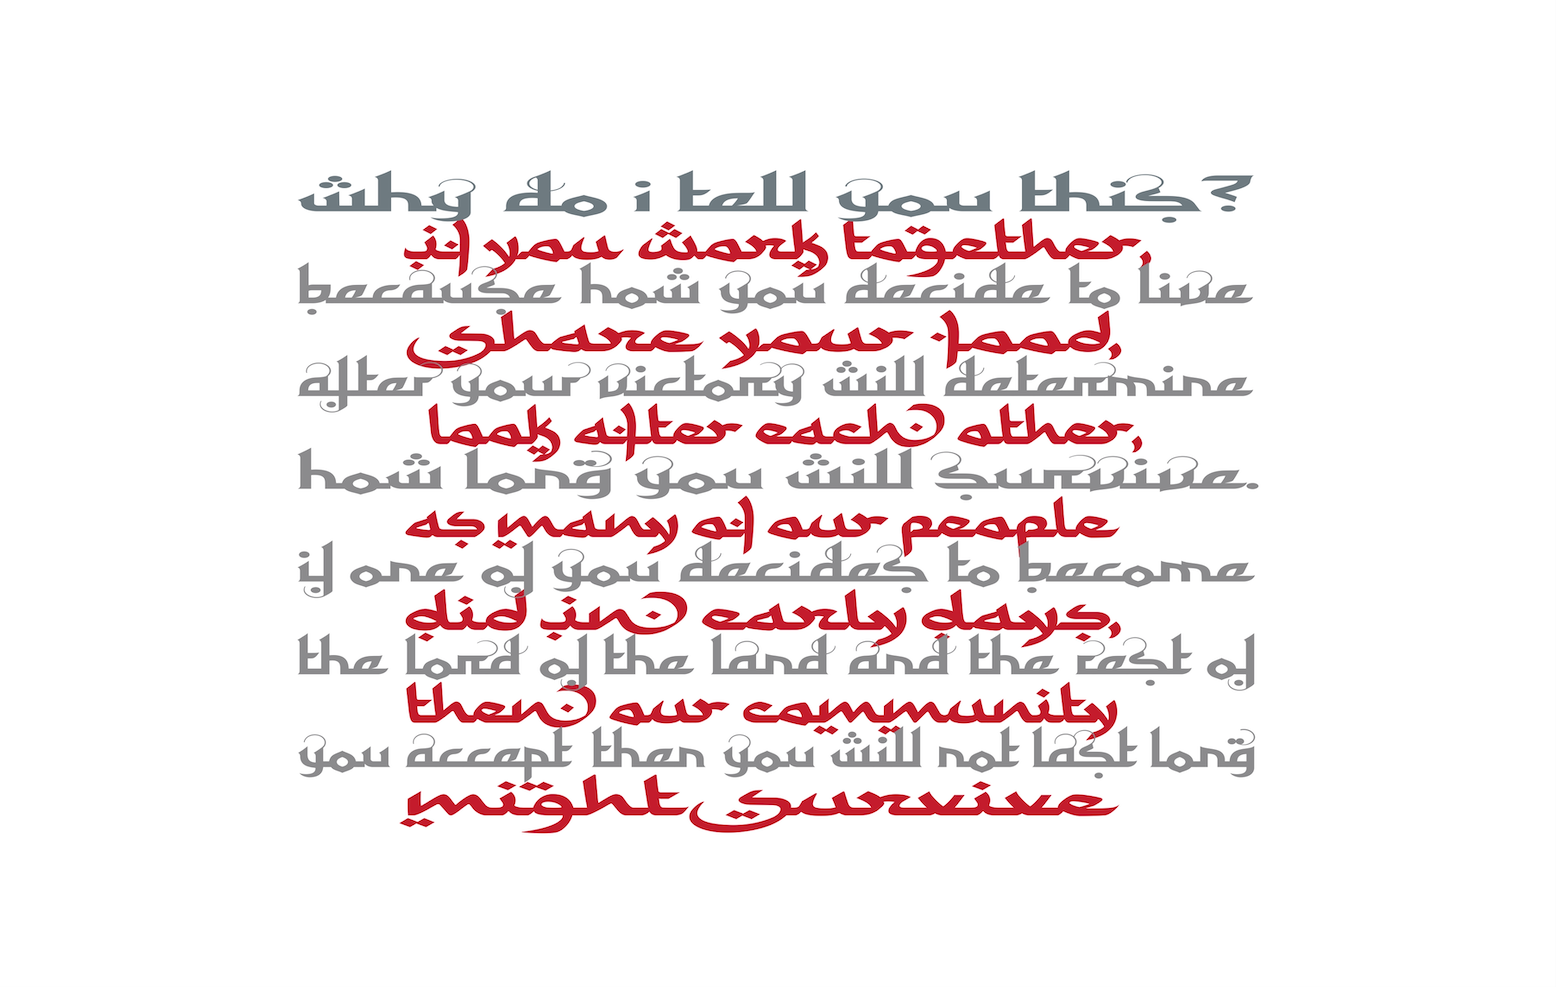 grey and red text on white background